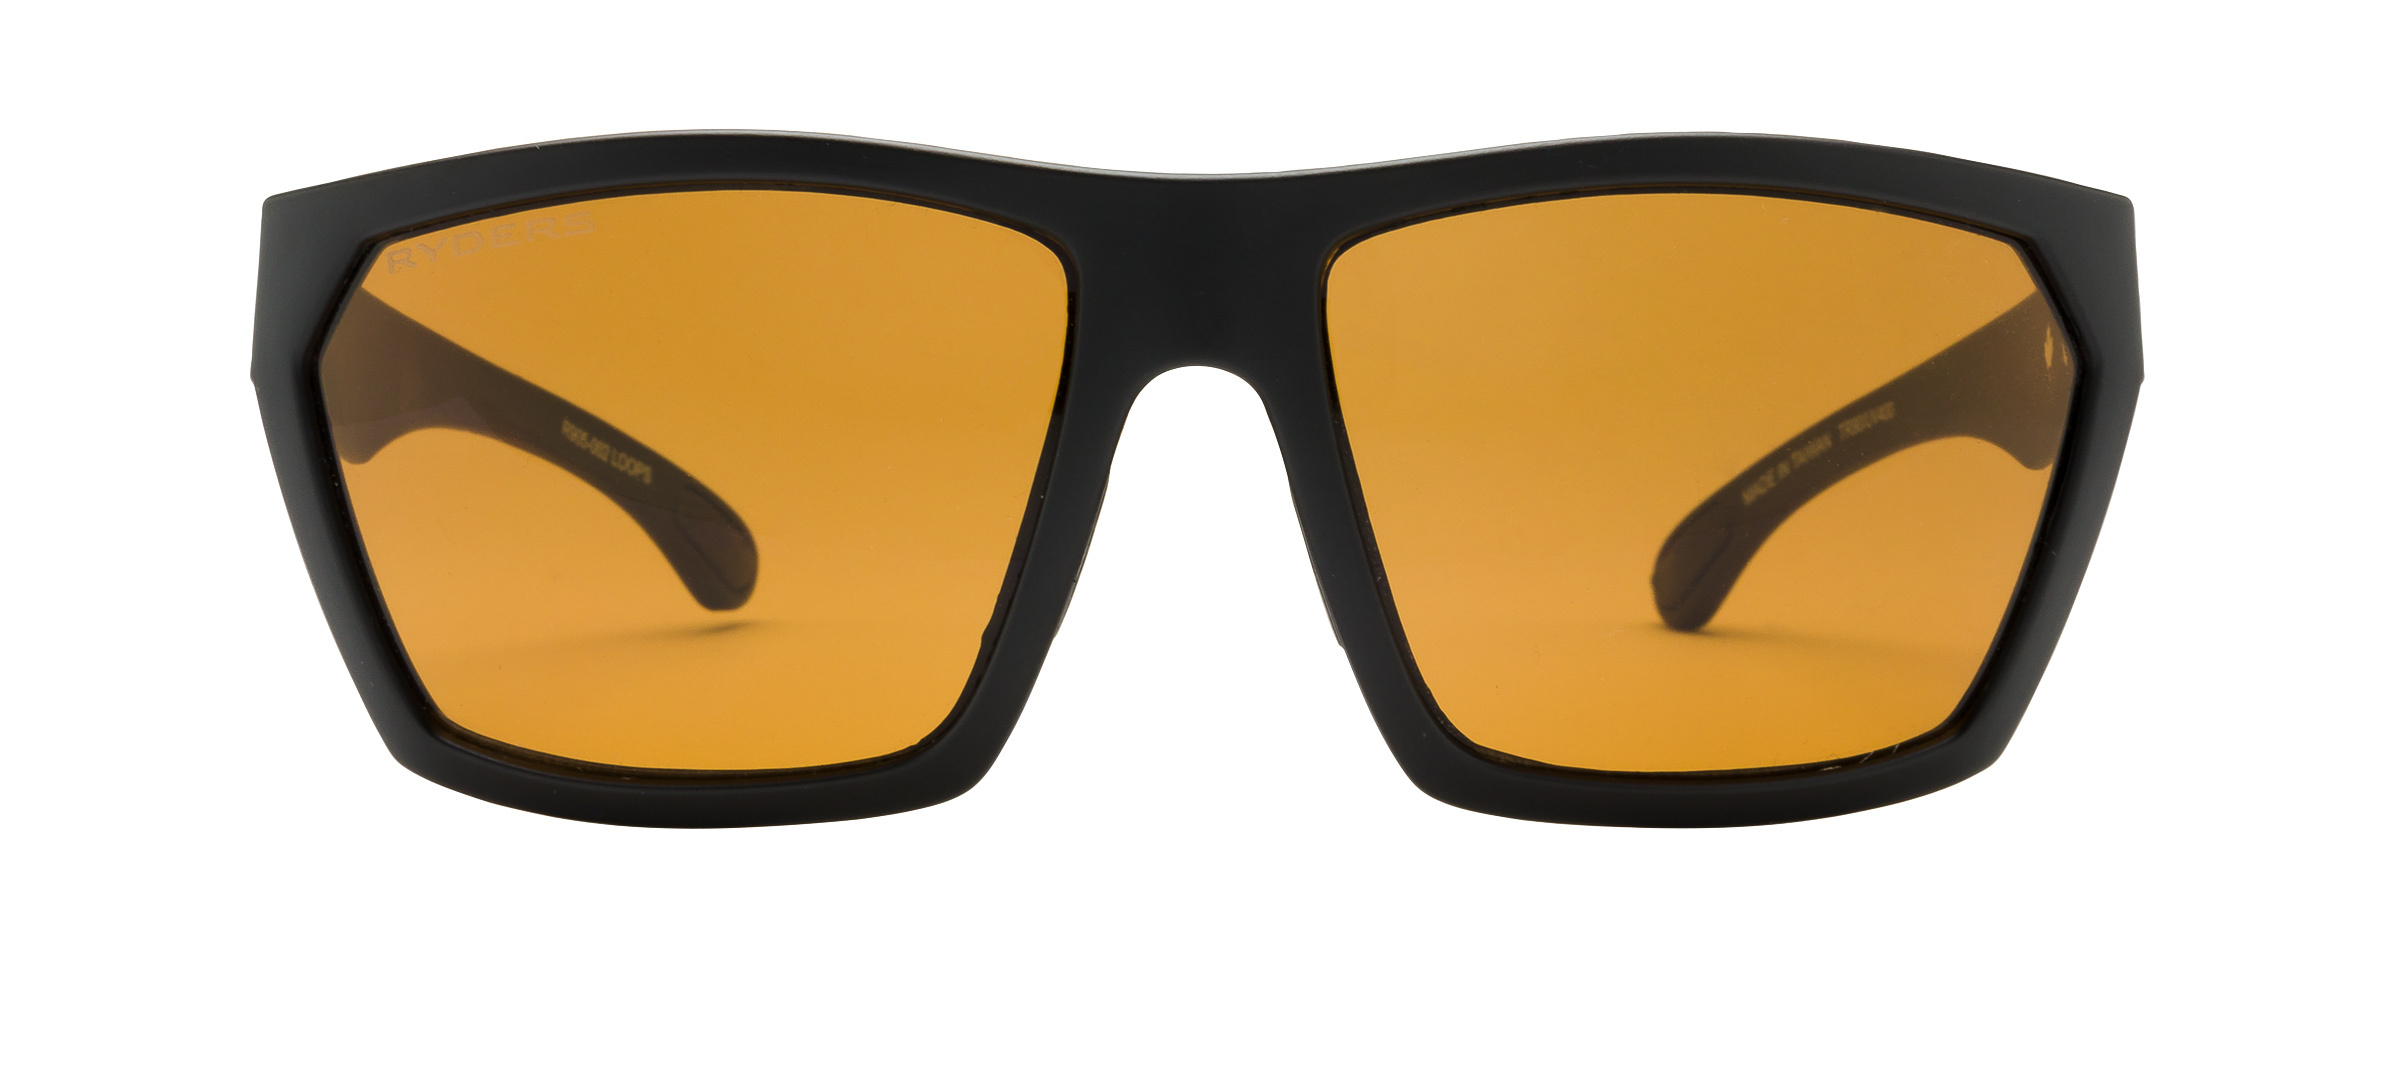 Men's Sunglasses - buy online | Clearly